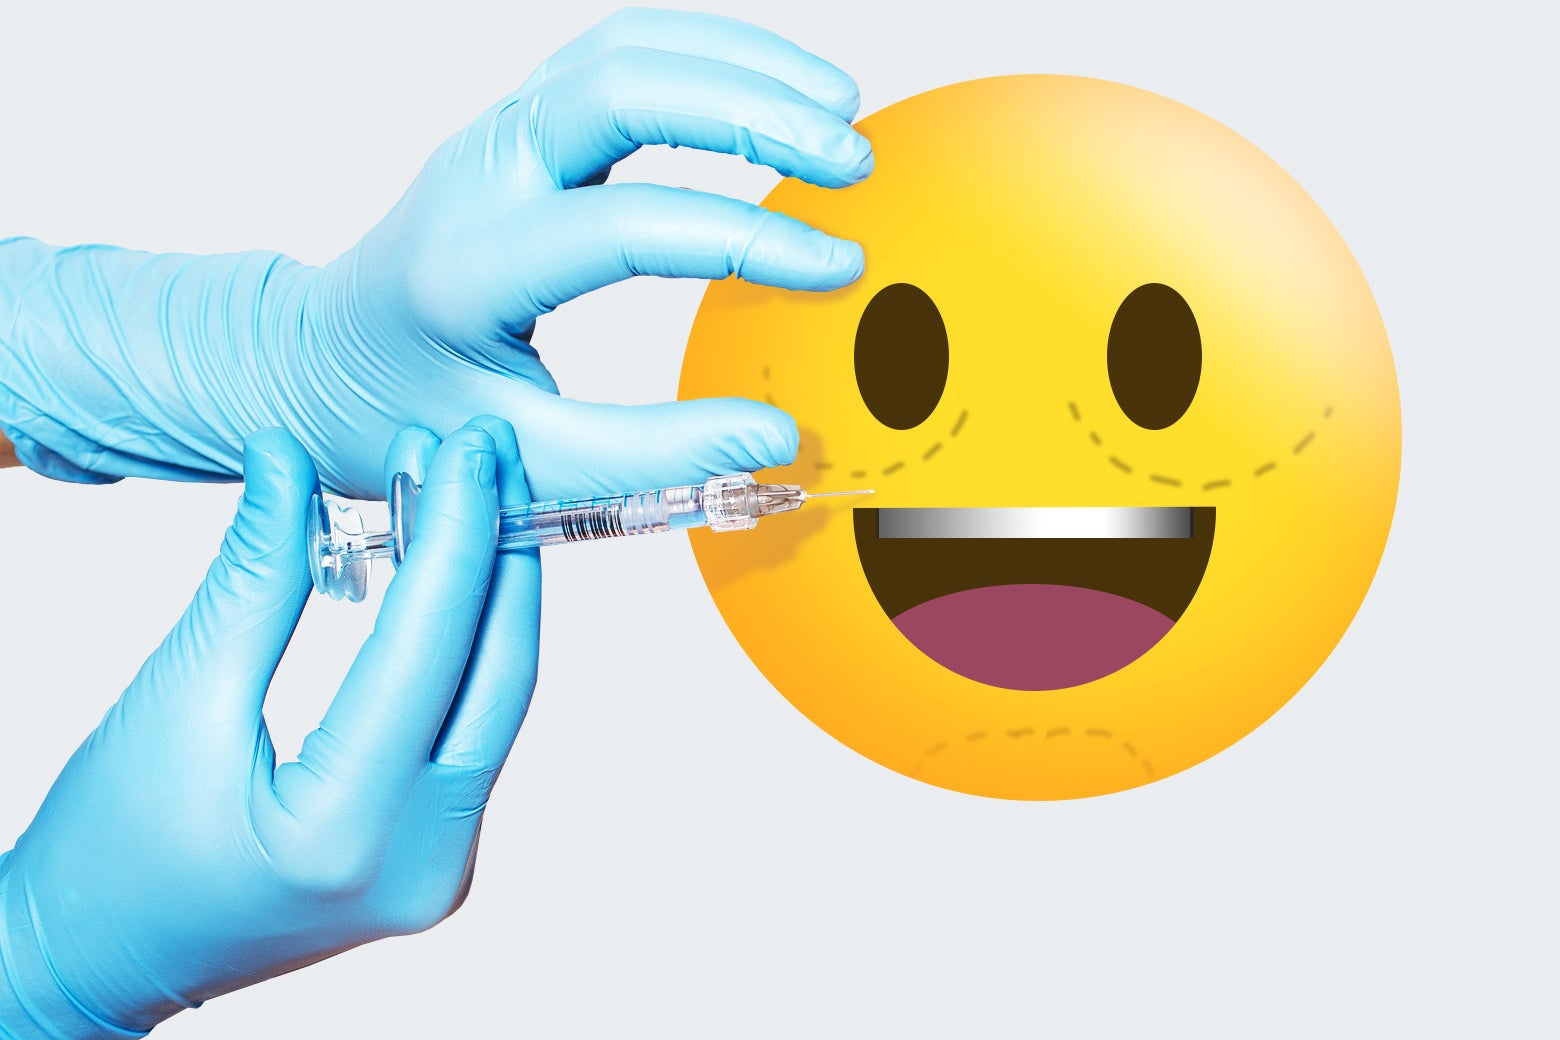 Gloved hands injecting a smiley face